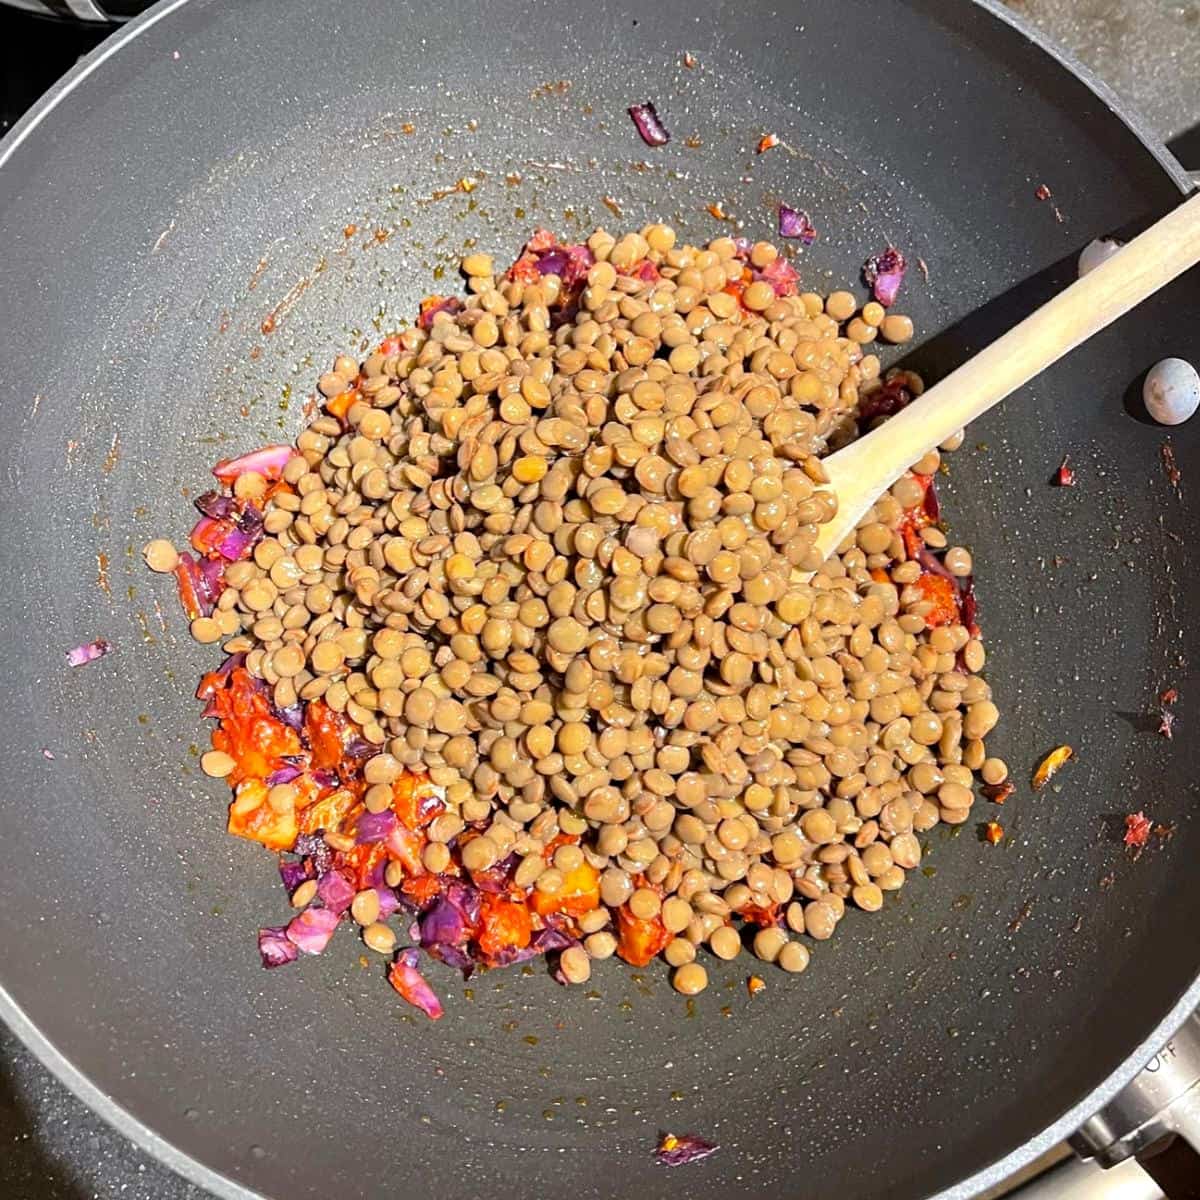 Lentils added to tomato, potato and cabbage filling in wok.